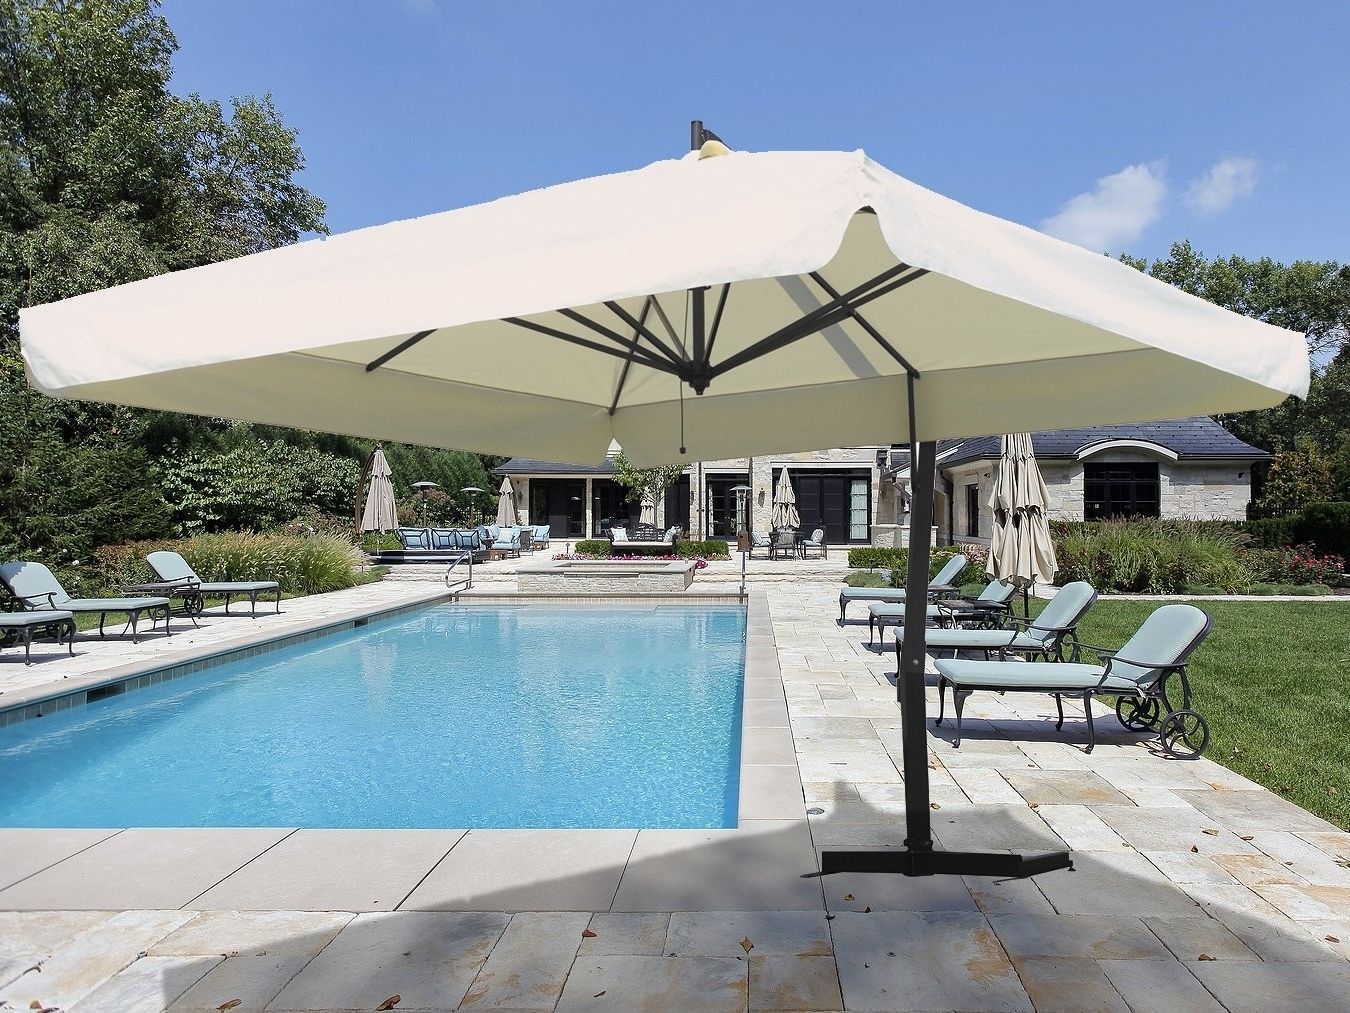 Well Liked Krevco Patio Umbrellas Pertaining To 10' Square Cantilever Patio Umbrella – Umbrellas – Patio & Outdoor (View 1 of 20)